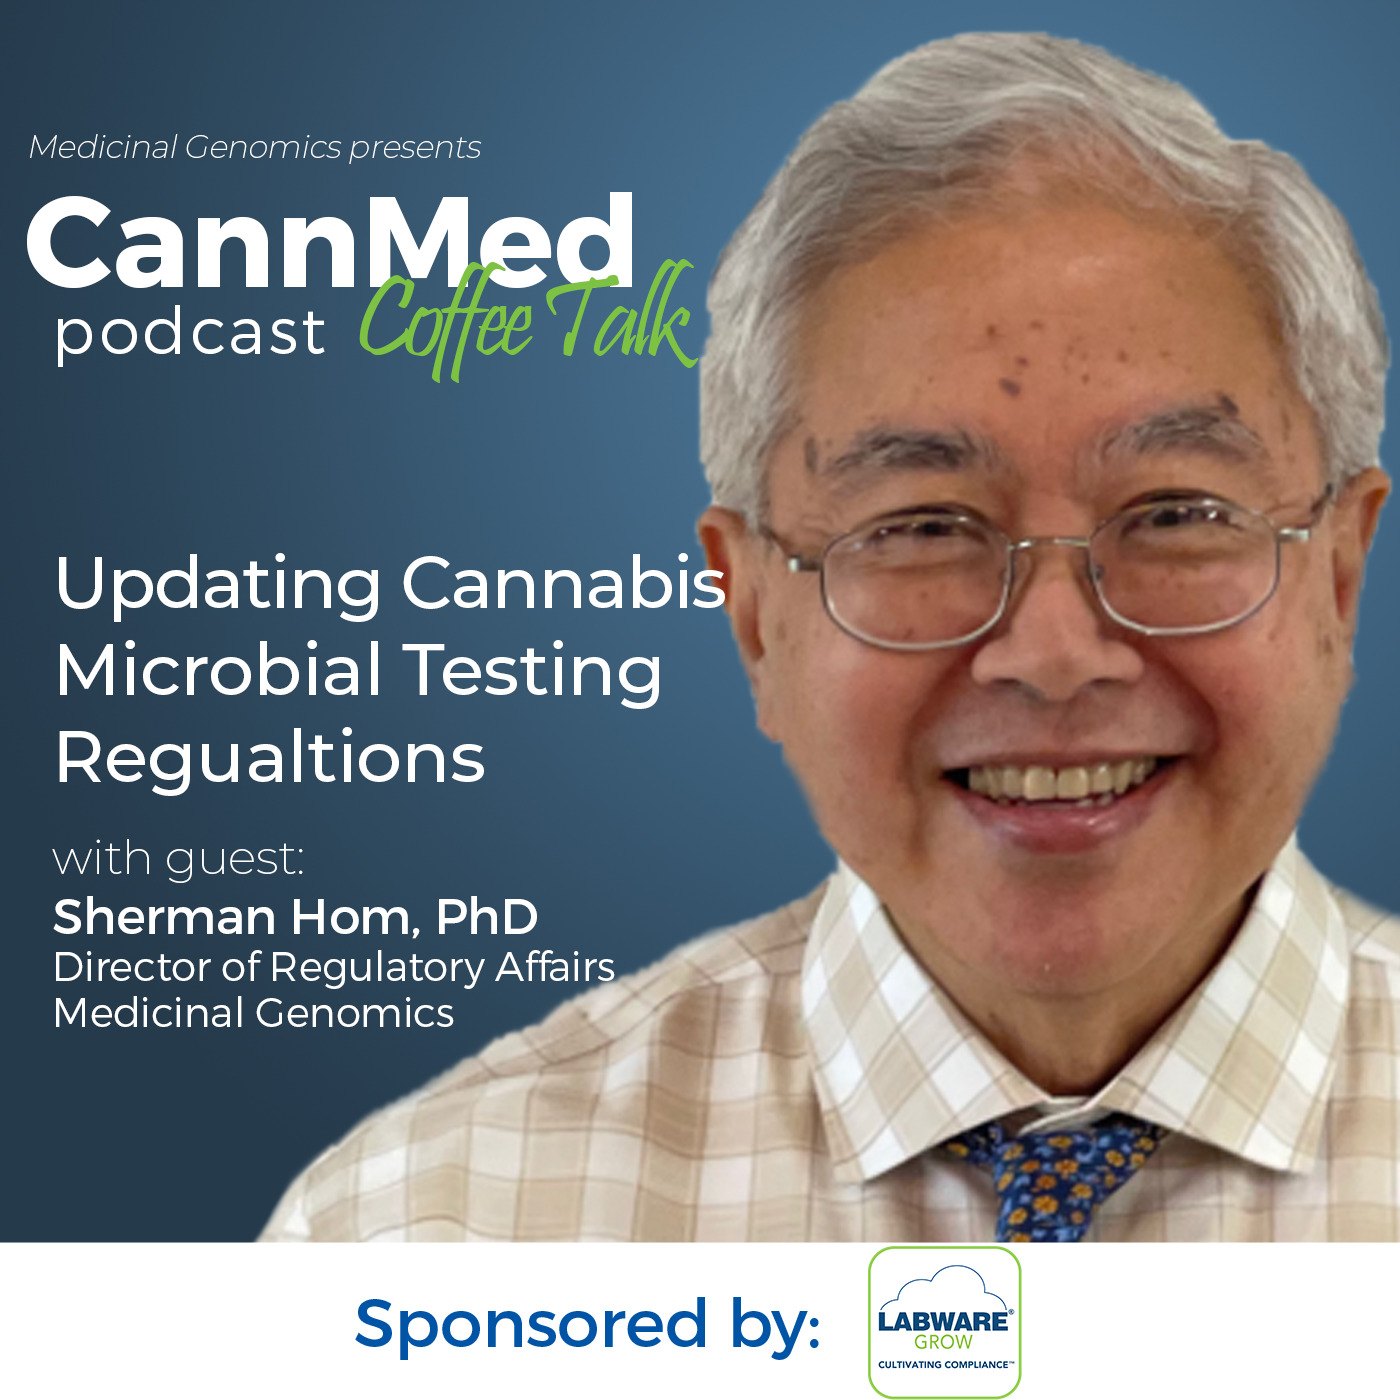 Featured image for “Updating Cannabis Microbial Testing Regulations with Sherman Hom, PhD”